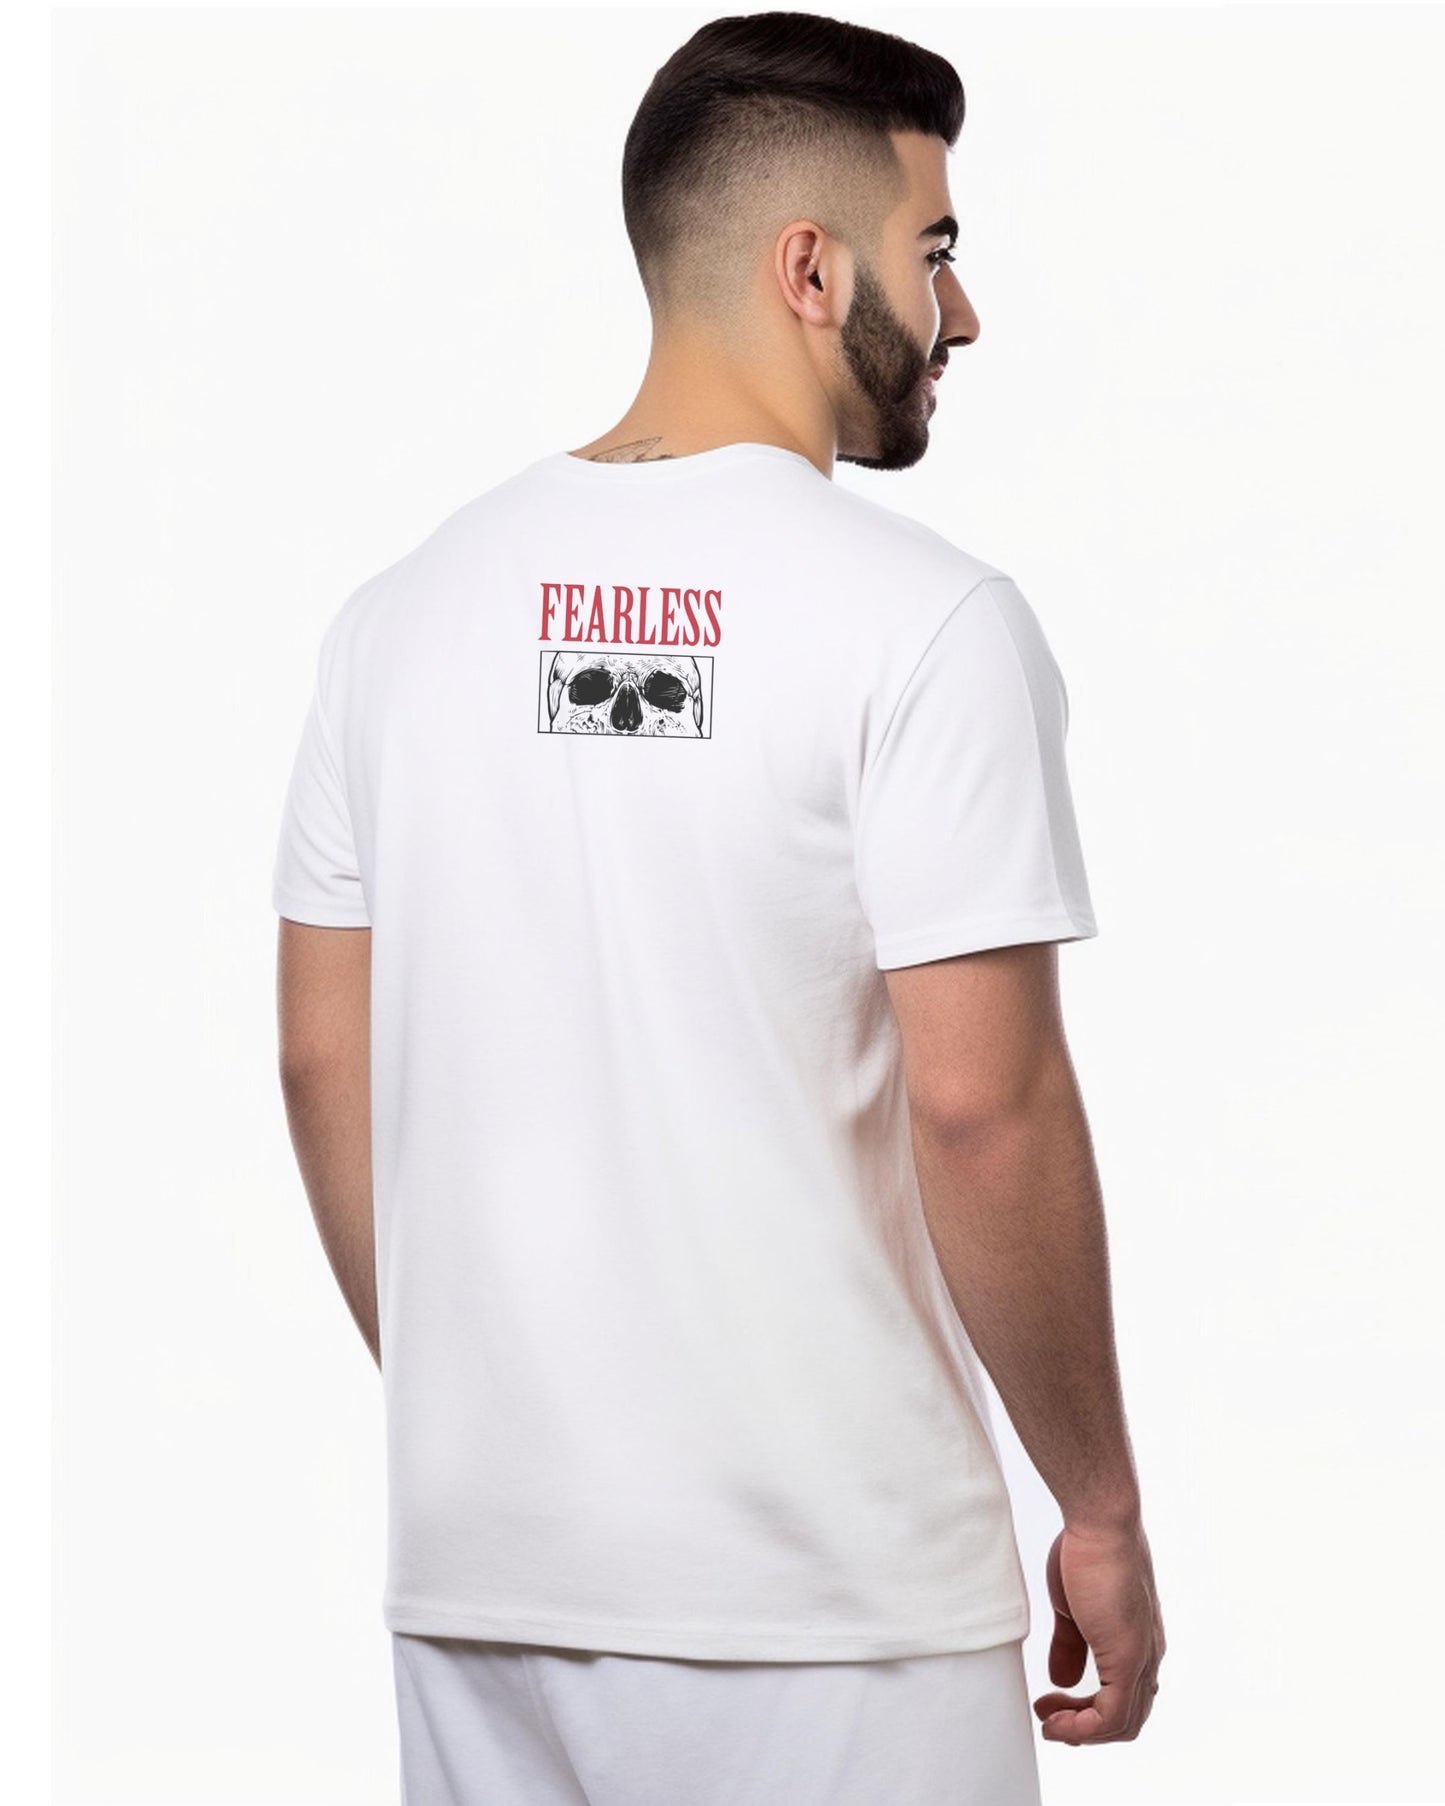 Fearless Relaxed Fit T-shirt for Men